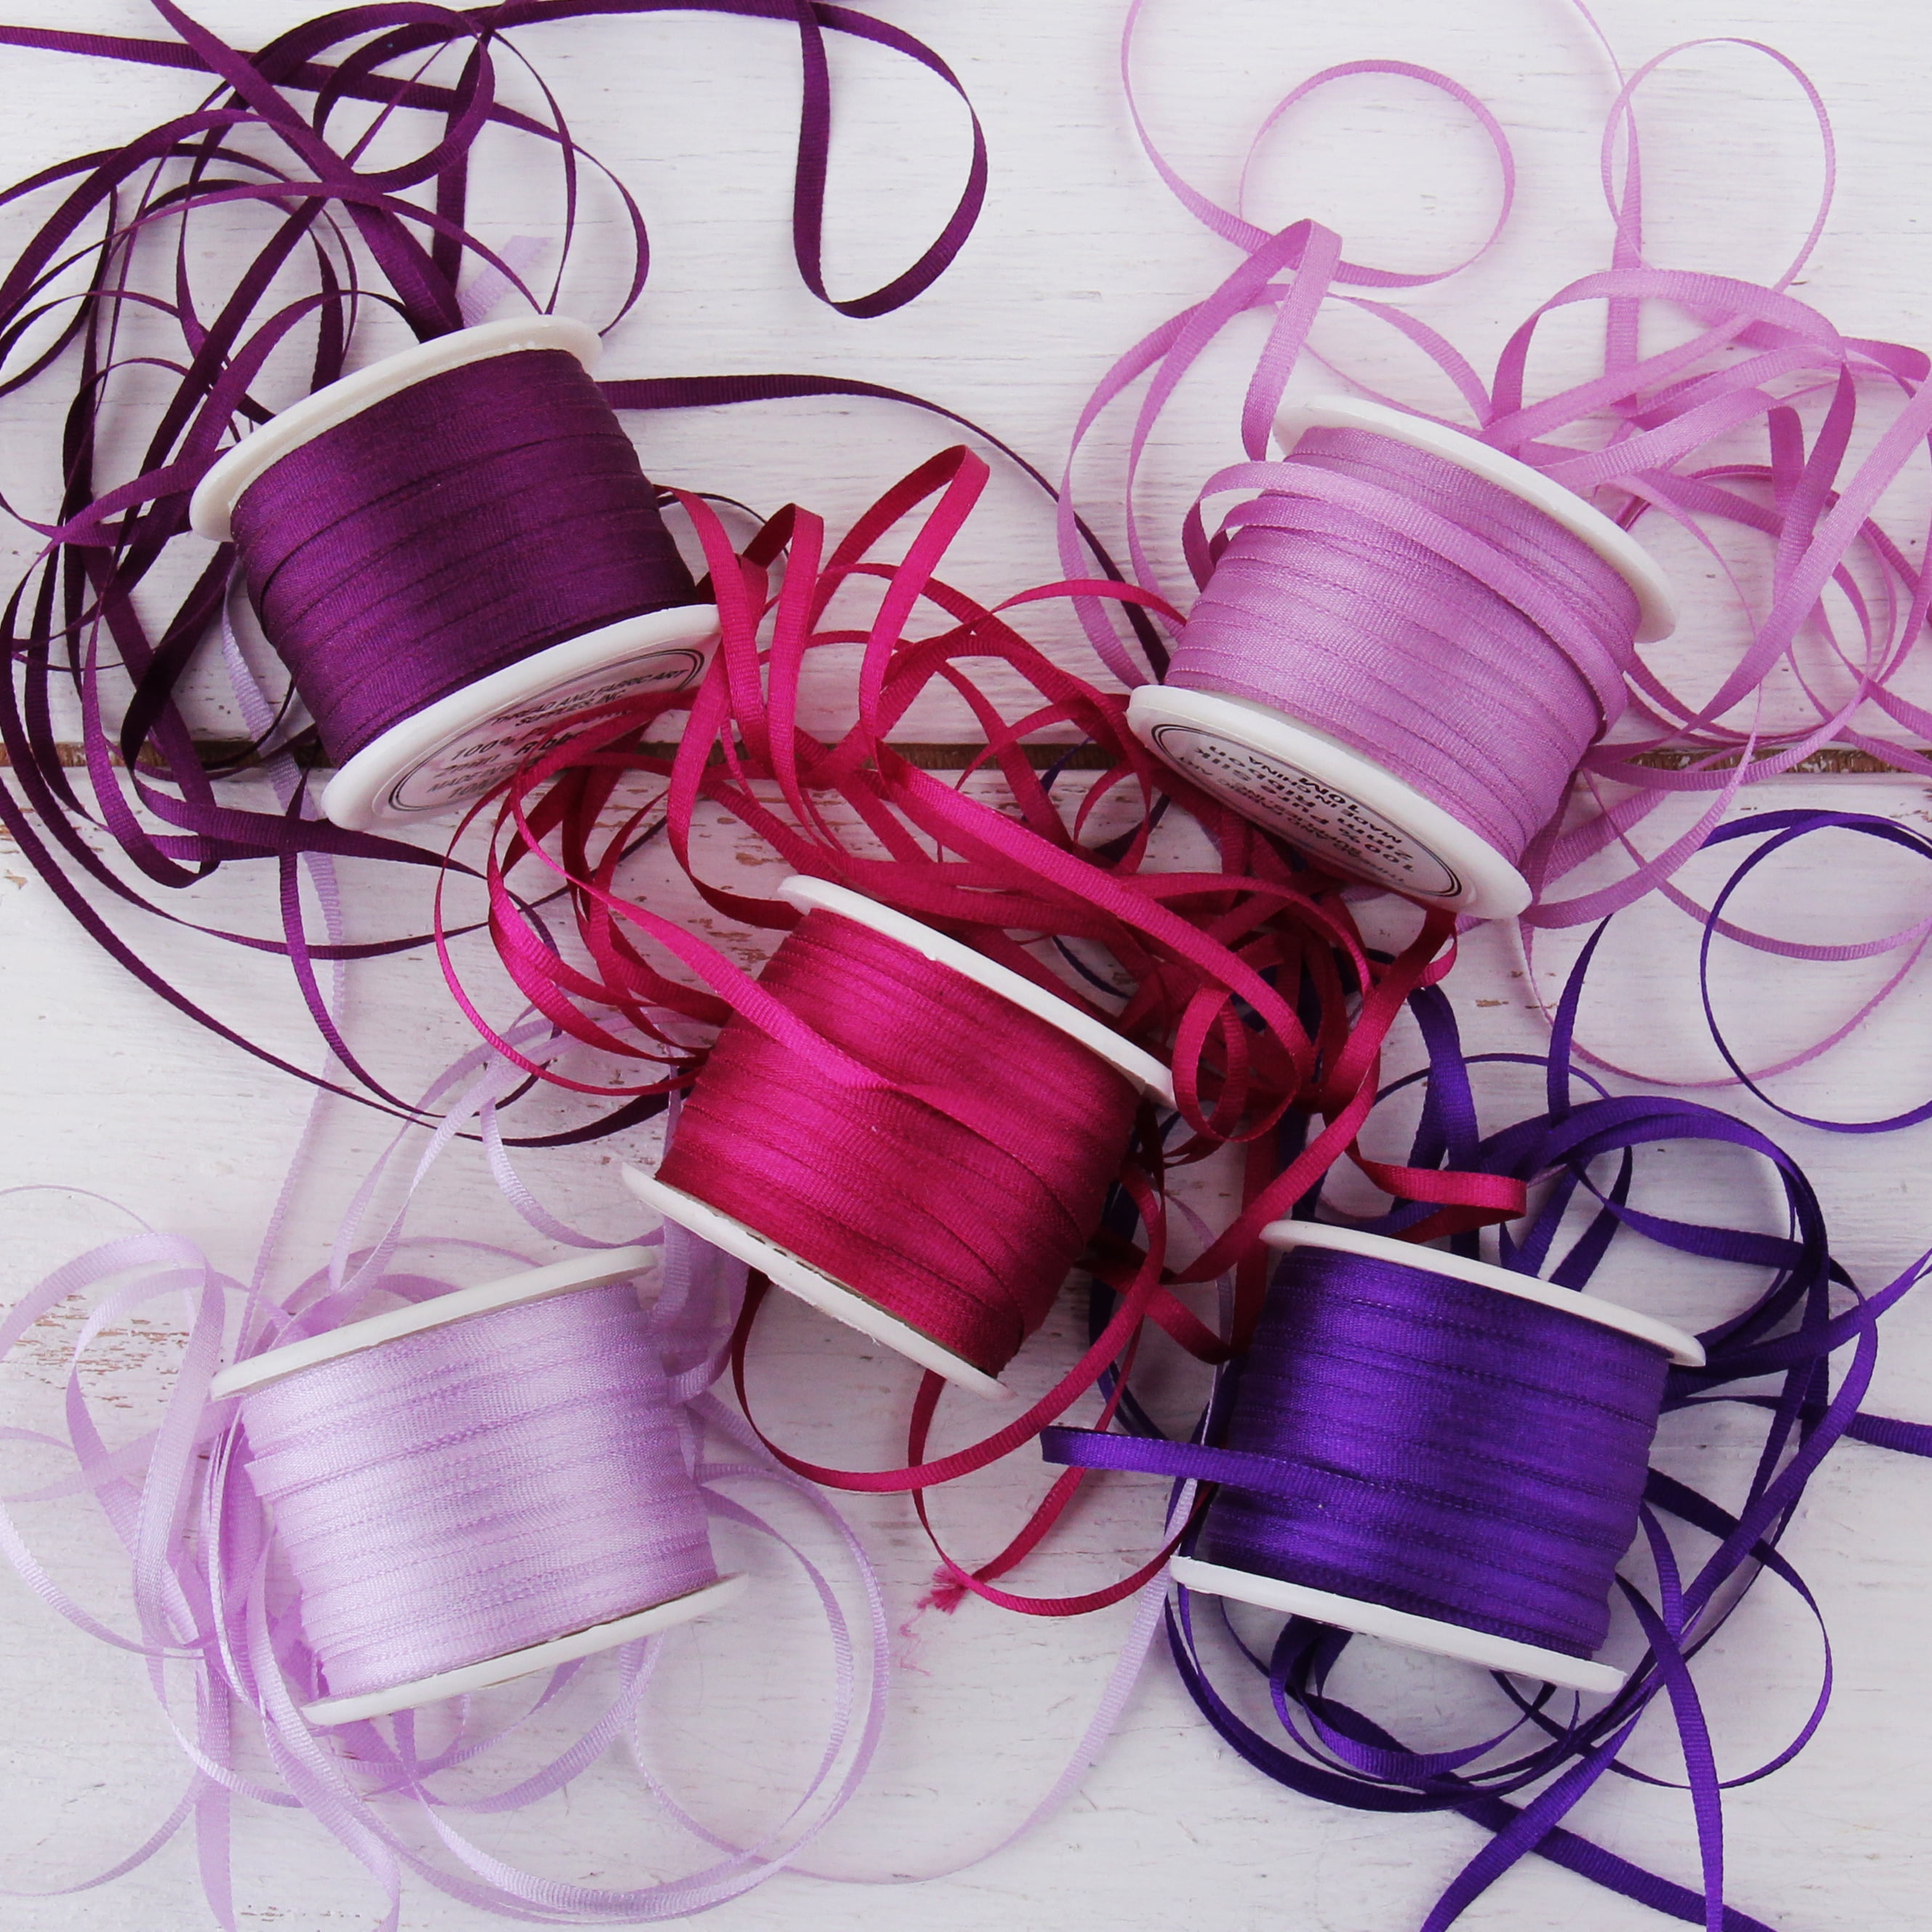 Dyed Pink Silk Thread Spool, Packaging Type: Reel at Rs 25/piece